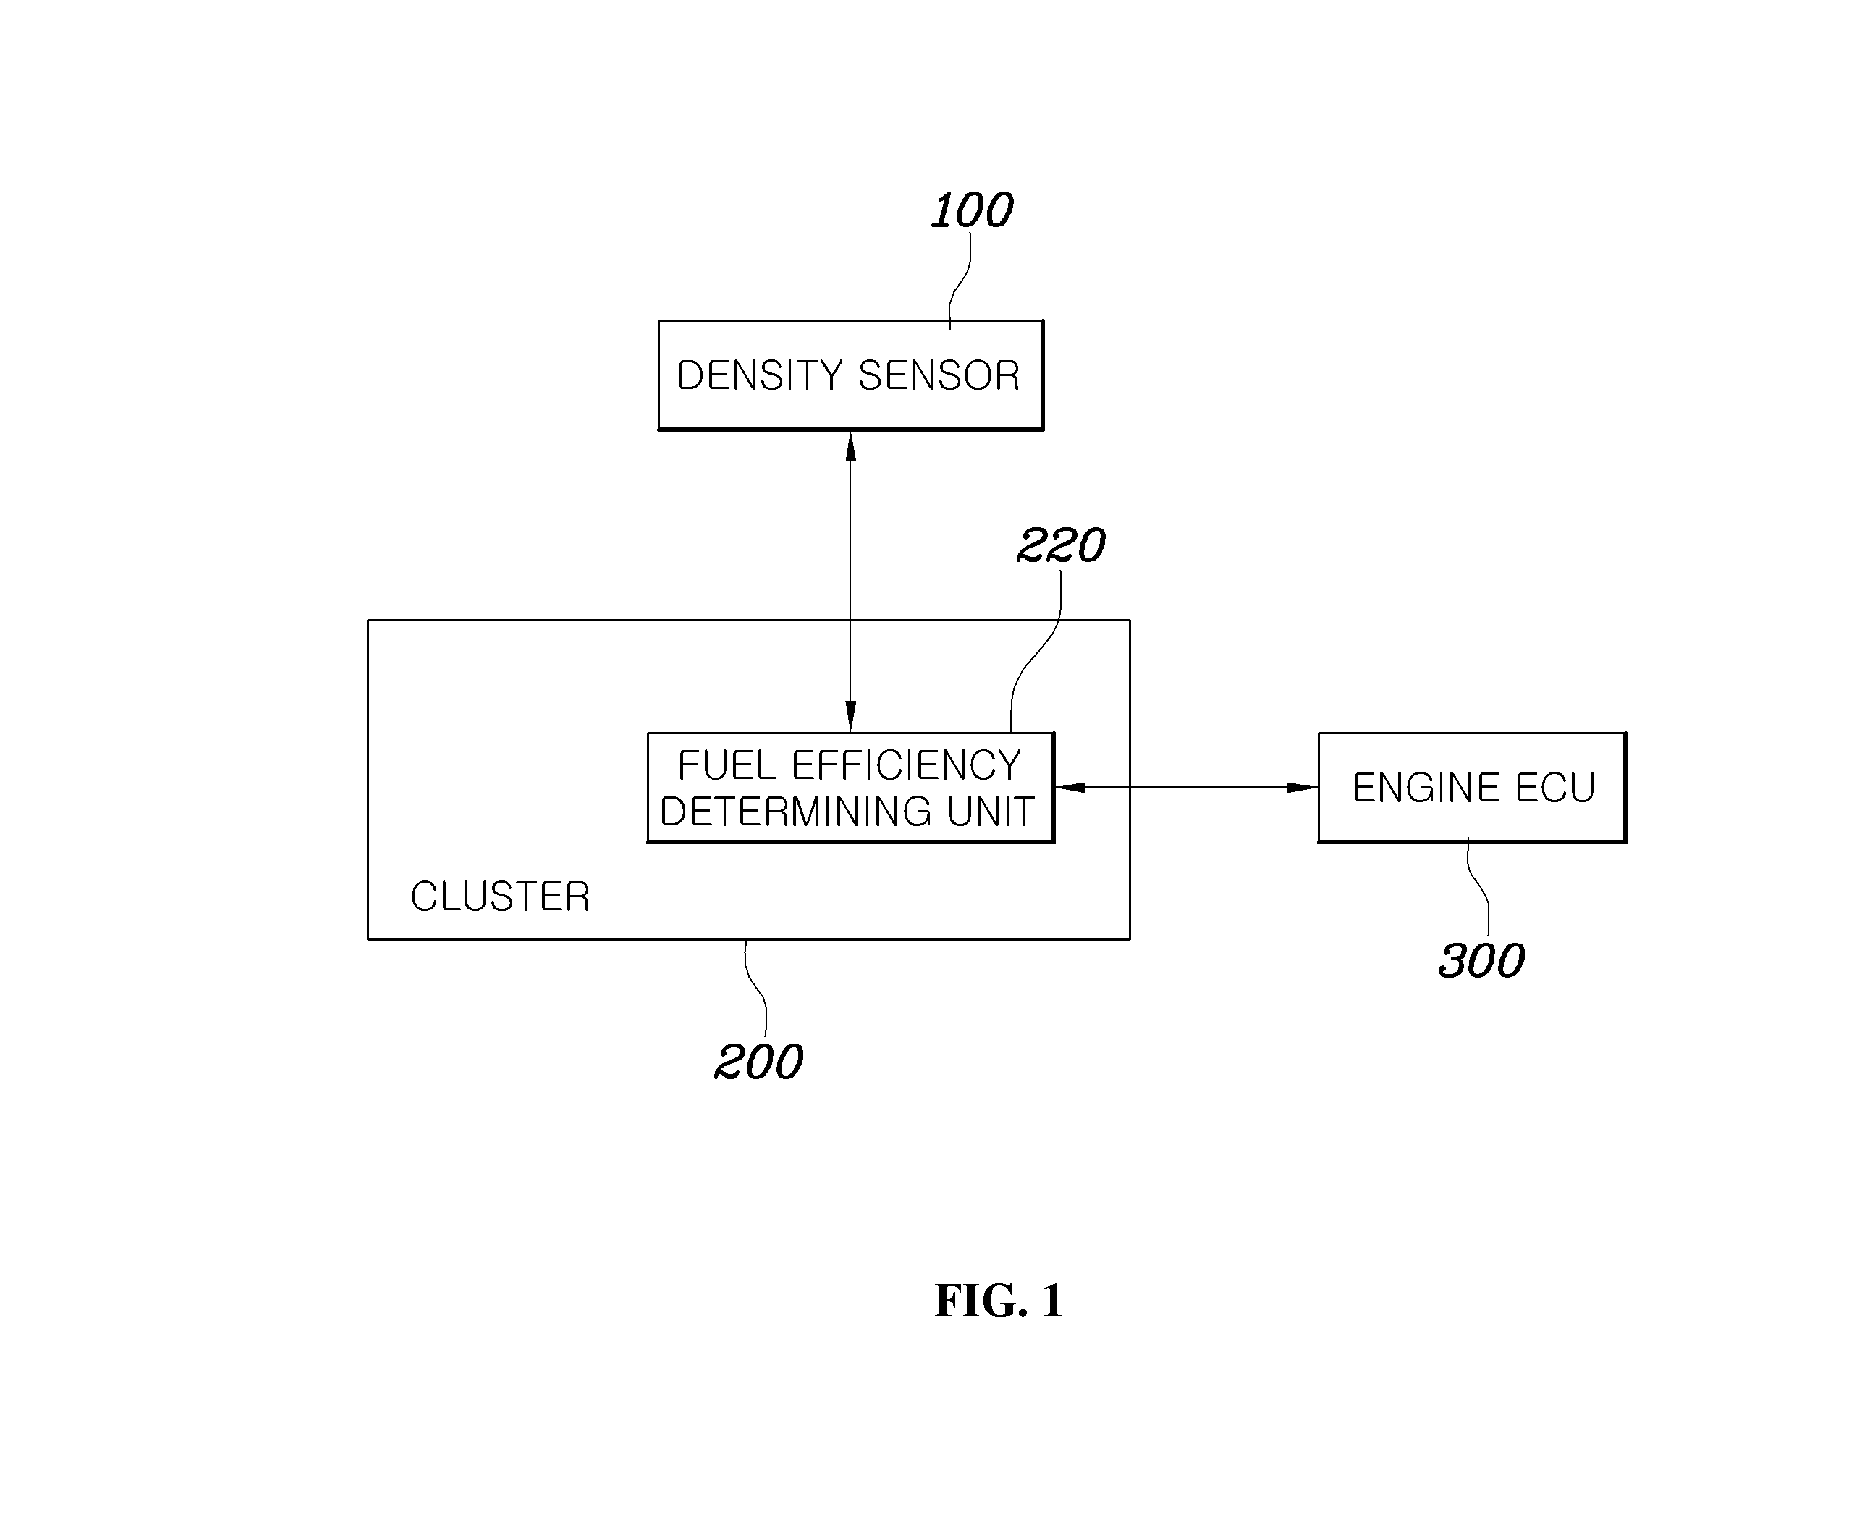 System and method for indicating fuel efficiency of flexible fuel vehicle